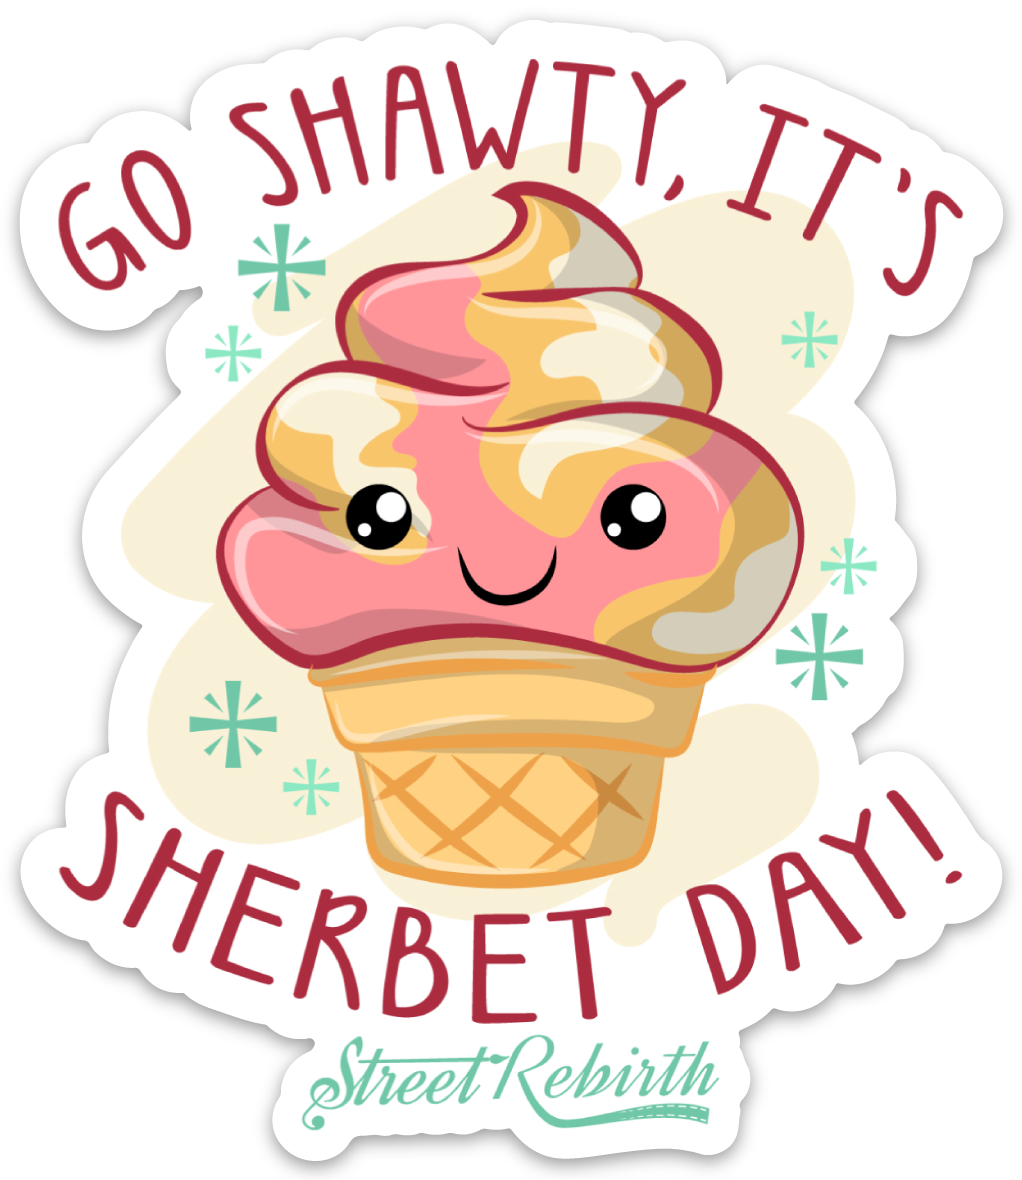 GO SHAWTY, IT'S SHERBET DAY PUN STICKER – ONE 4 INCH WATER PROOF VINYL STICKER – FOR HYDRO FLASK, SKATEBOARD, LAPTOP, PLANNER, CAR, COLLECTING, GIFTING